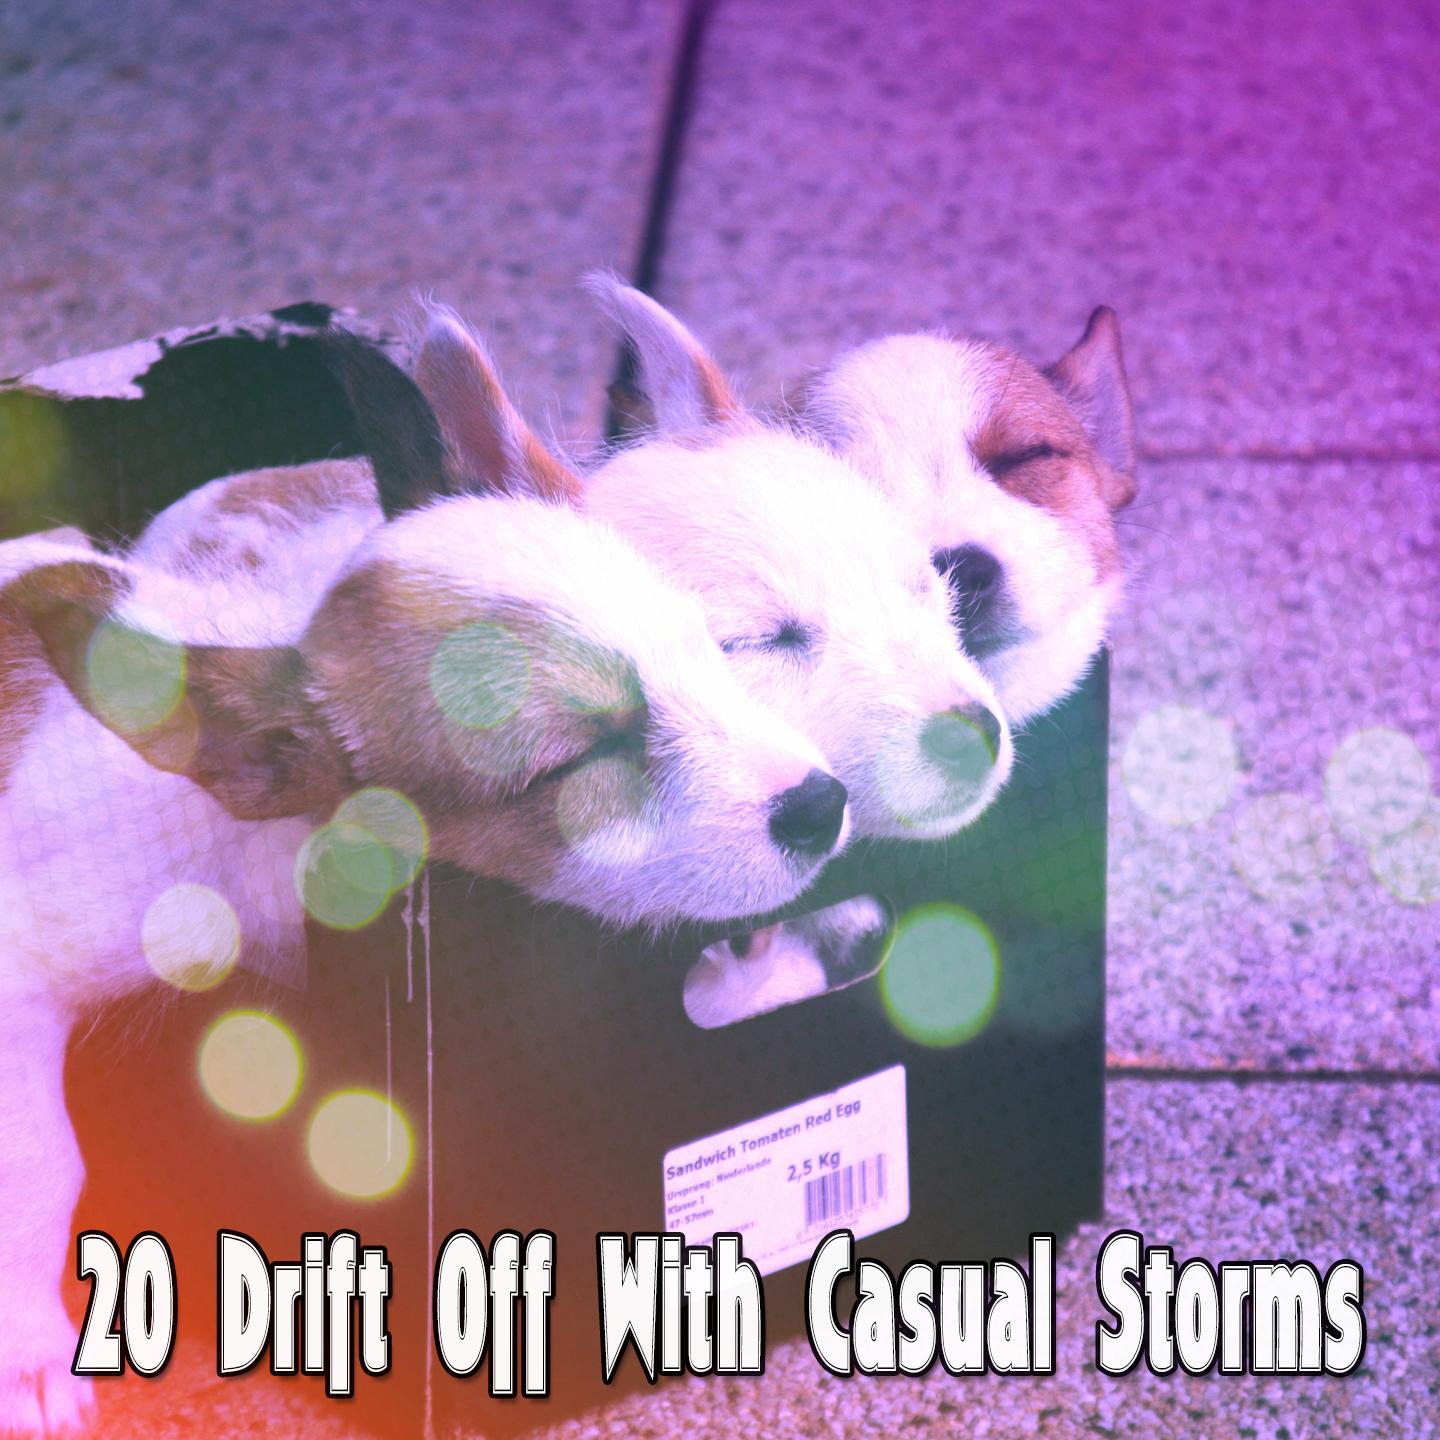 20 Drift Off With Casual Storms